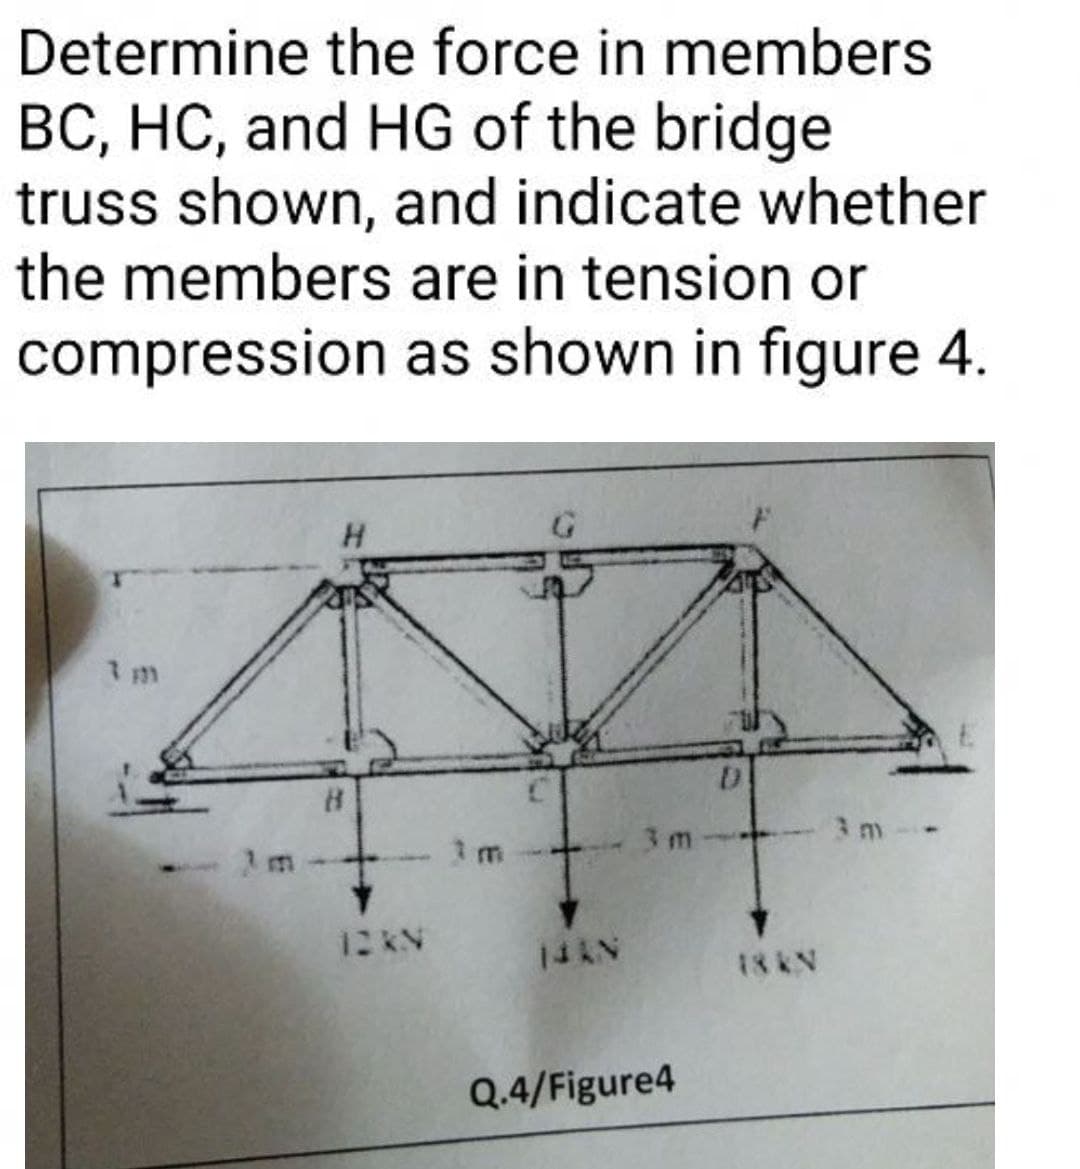 Determine the force in members
BC, HC, and HG of the bridge
truss shown, and indicate whether
the members are in tension or
compression as shown in figure 4.
3 m
3 m
1 m
12 KN
14AN
18 KN
Q.4/Figure4
